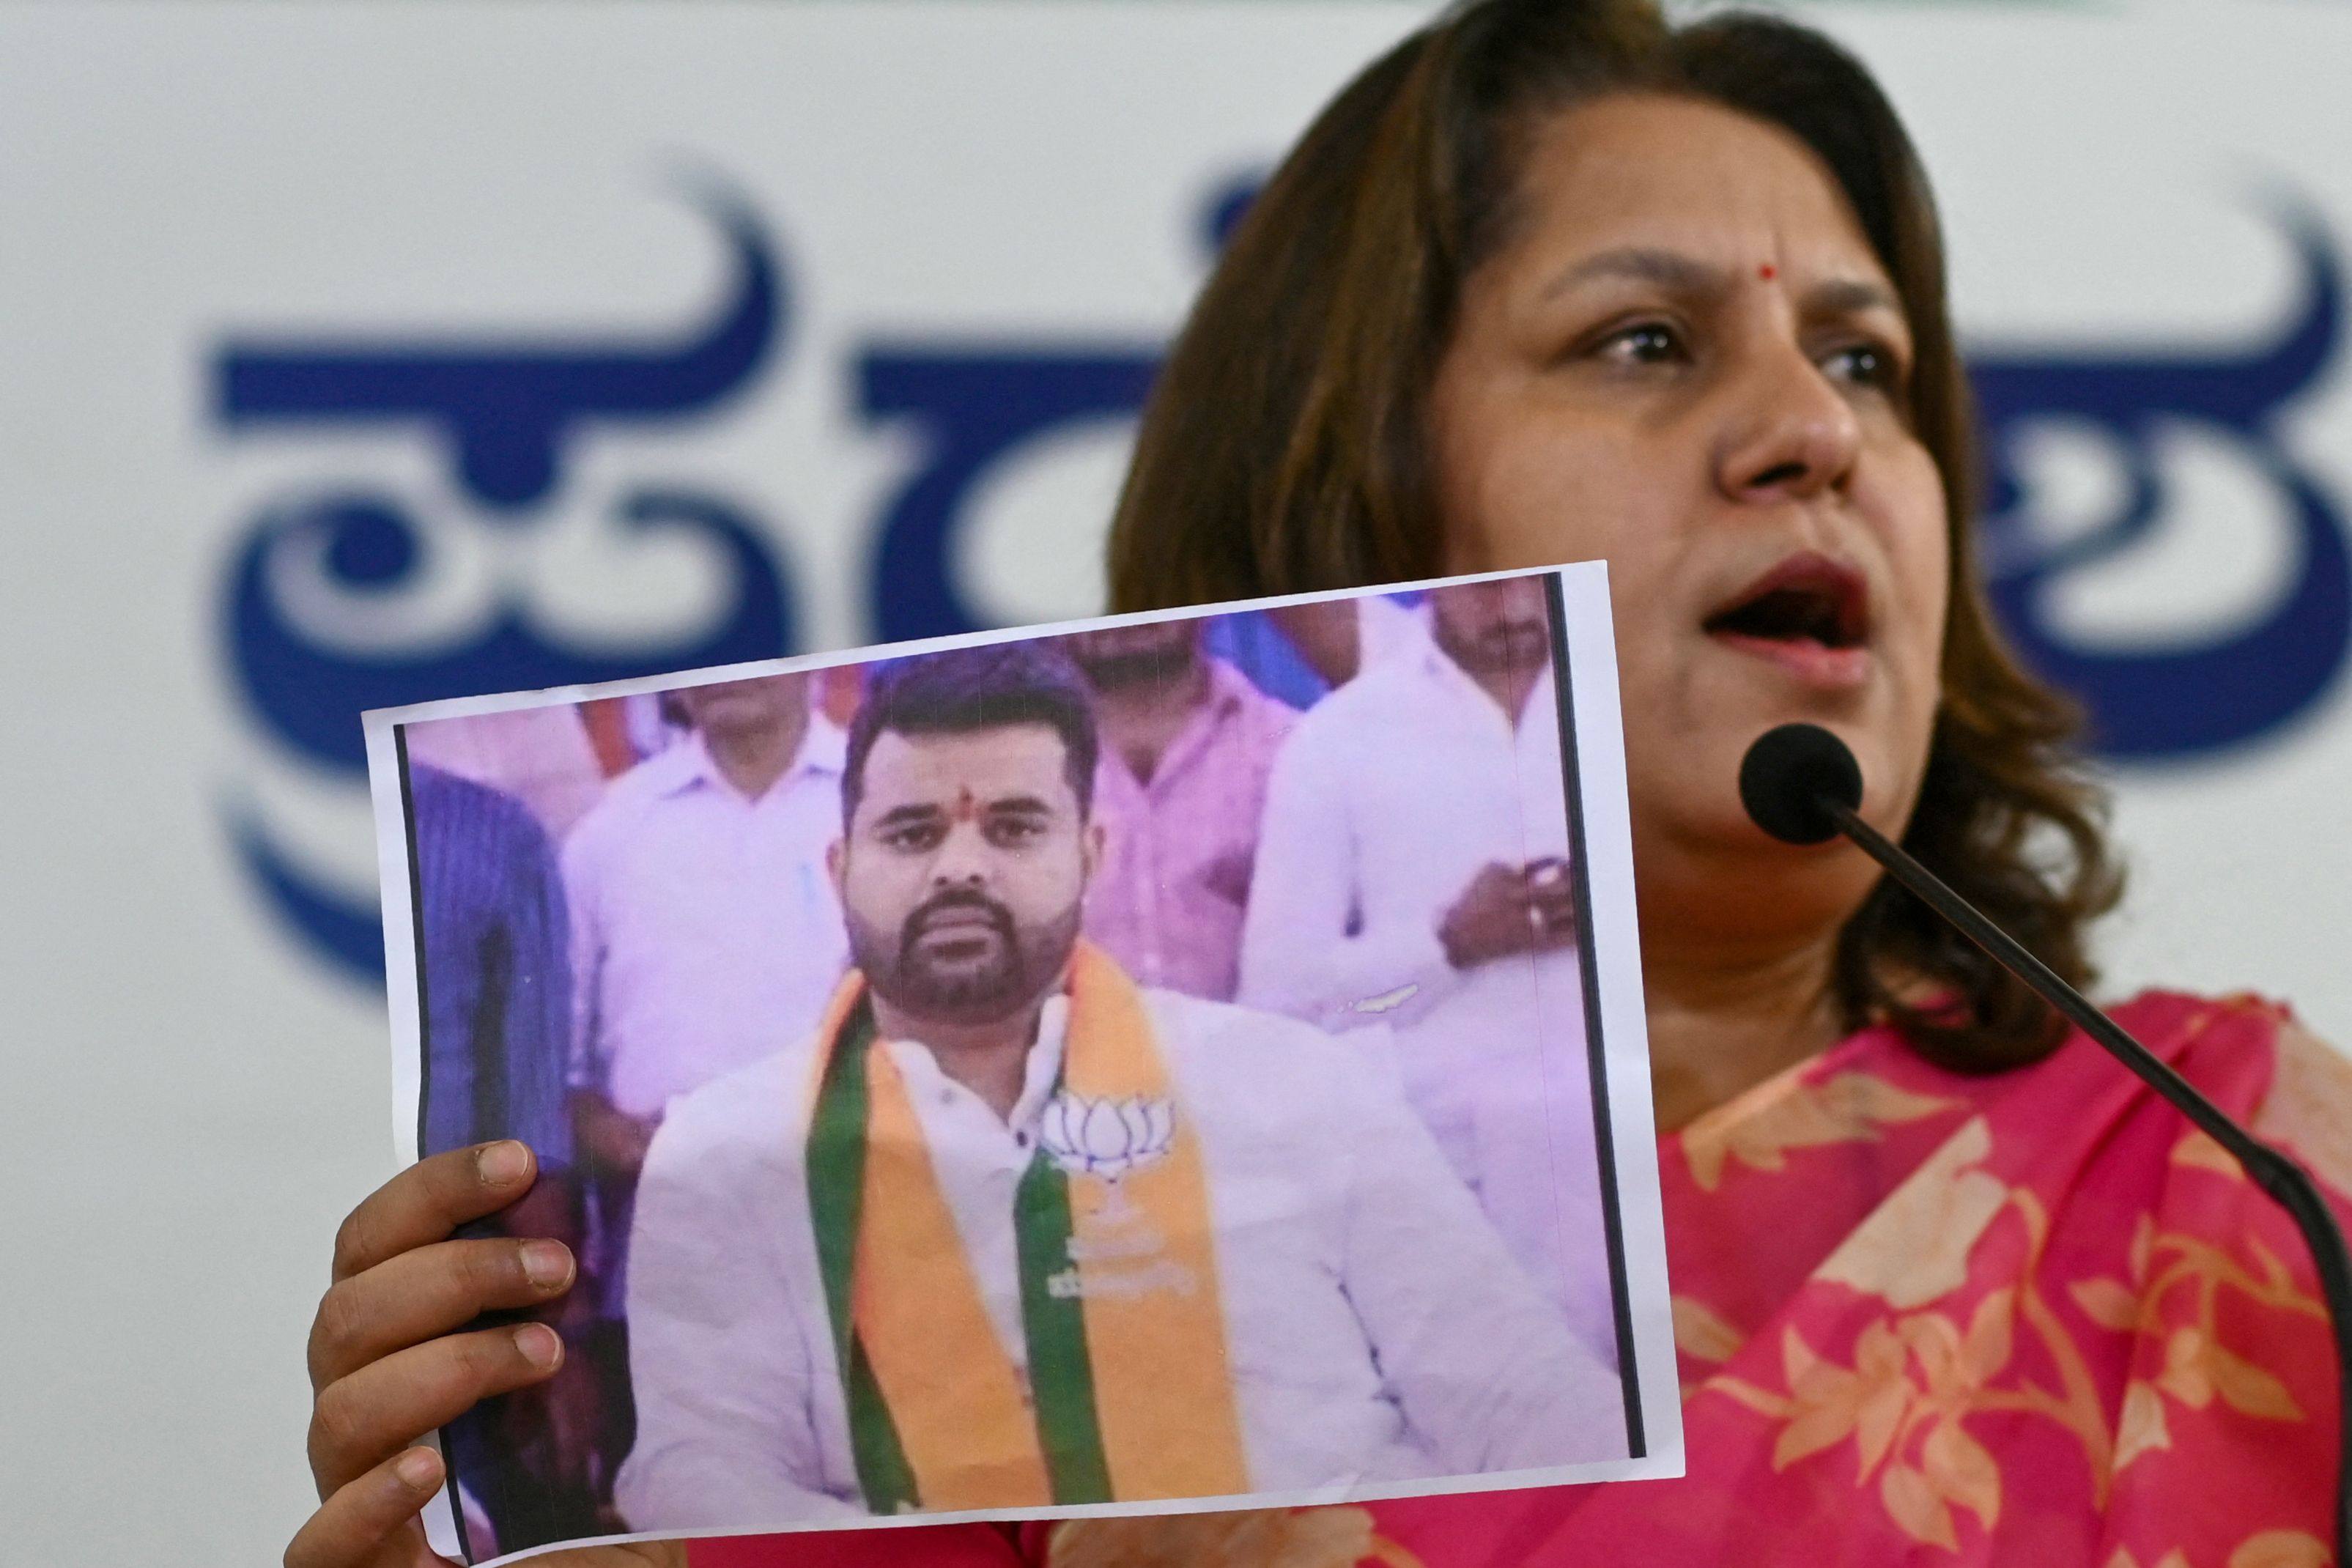 Congress spokeswoman Supriya Shrinate shows a photograph featuring JD(S) MP Prajwal Revanna who has been summoned for an alleged sexual abuse case. Photo: AFP